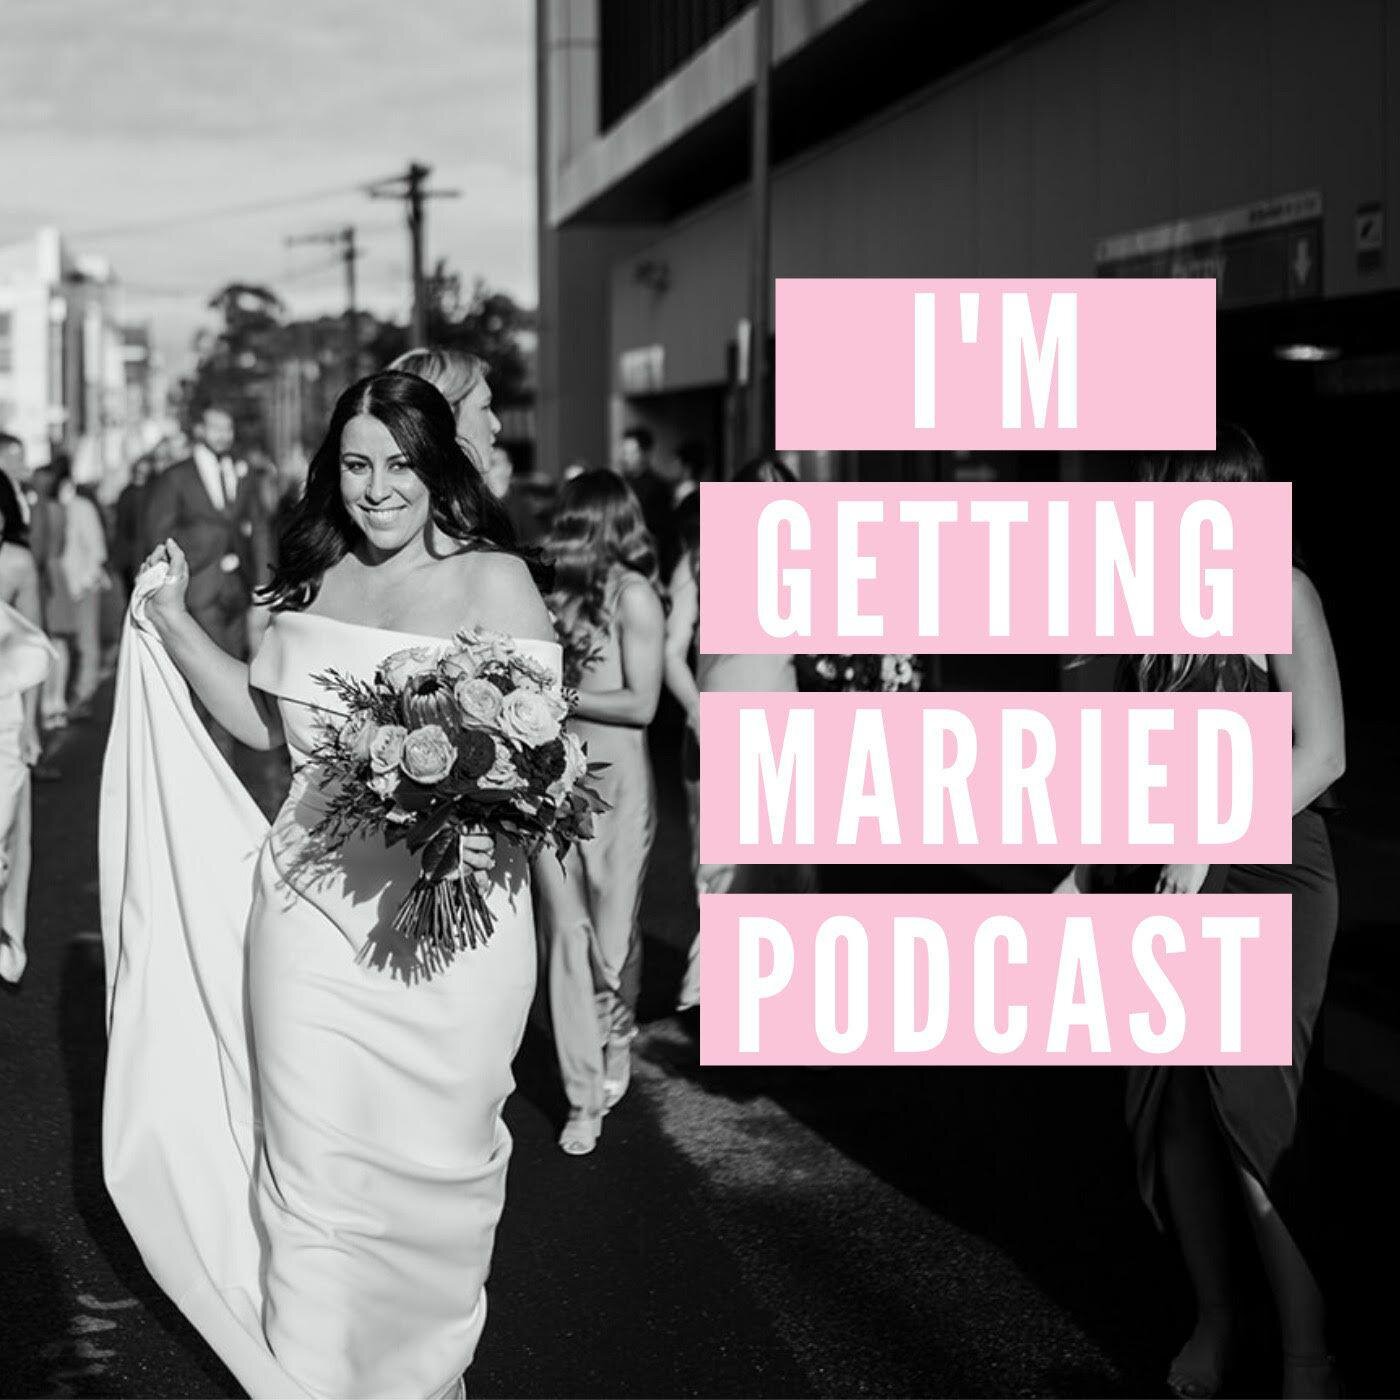 im-getting-married-podcast.jpg